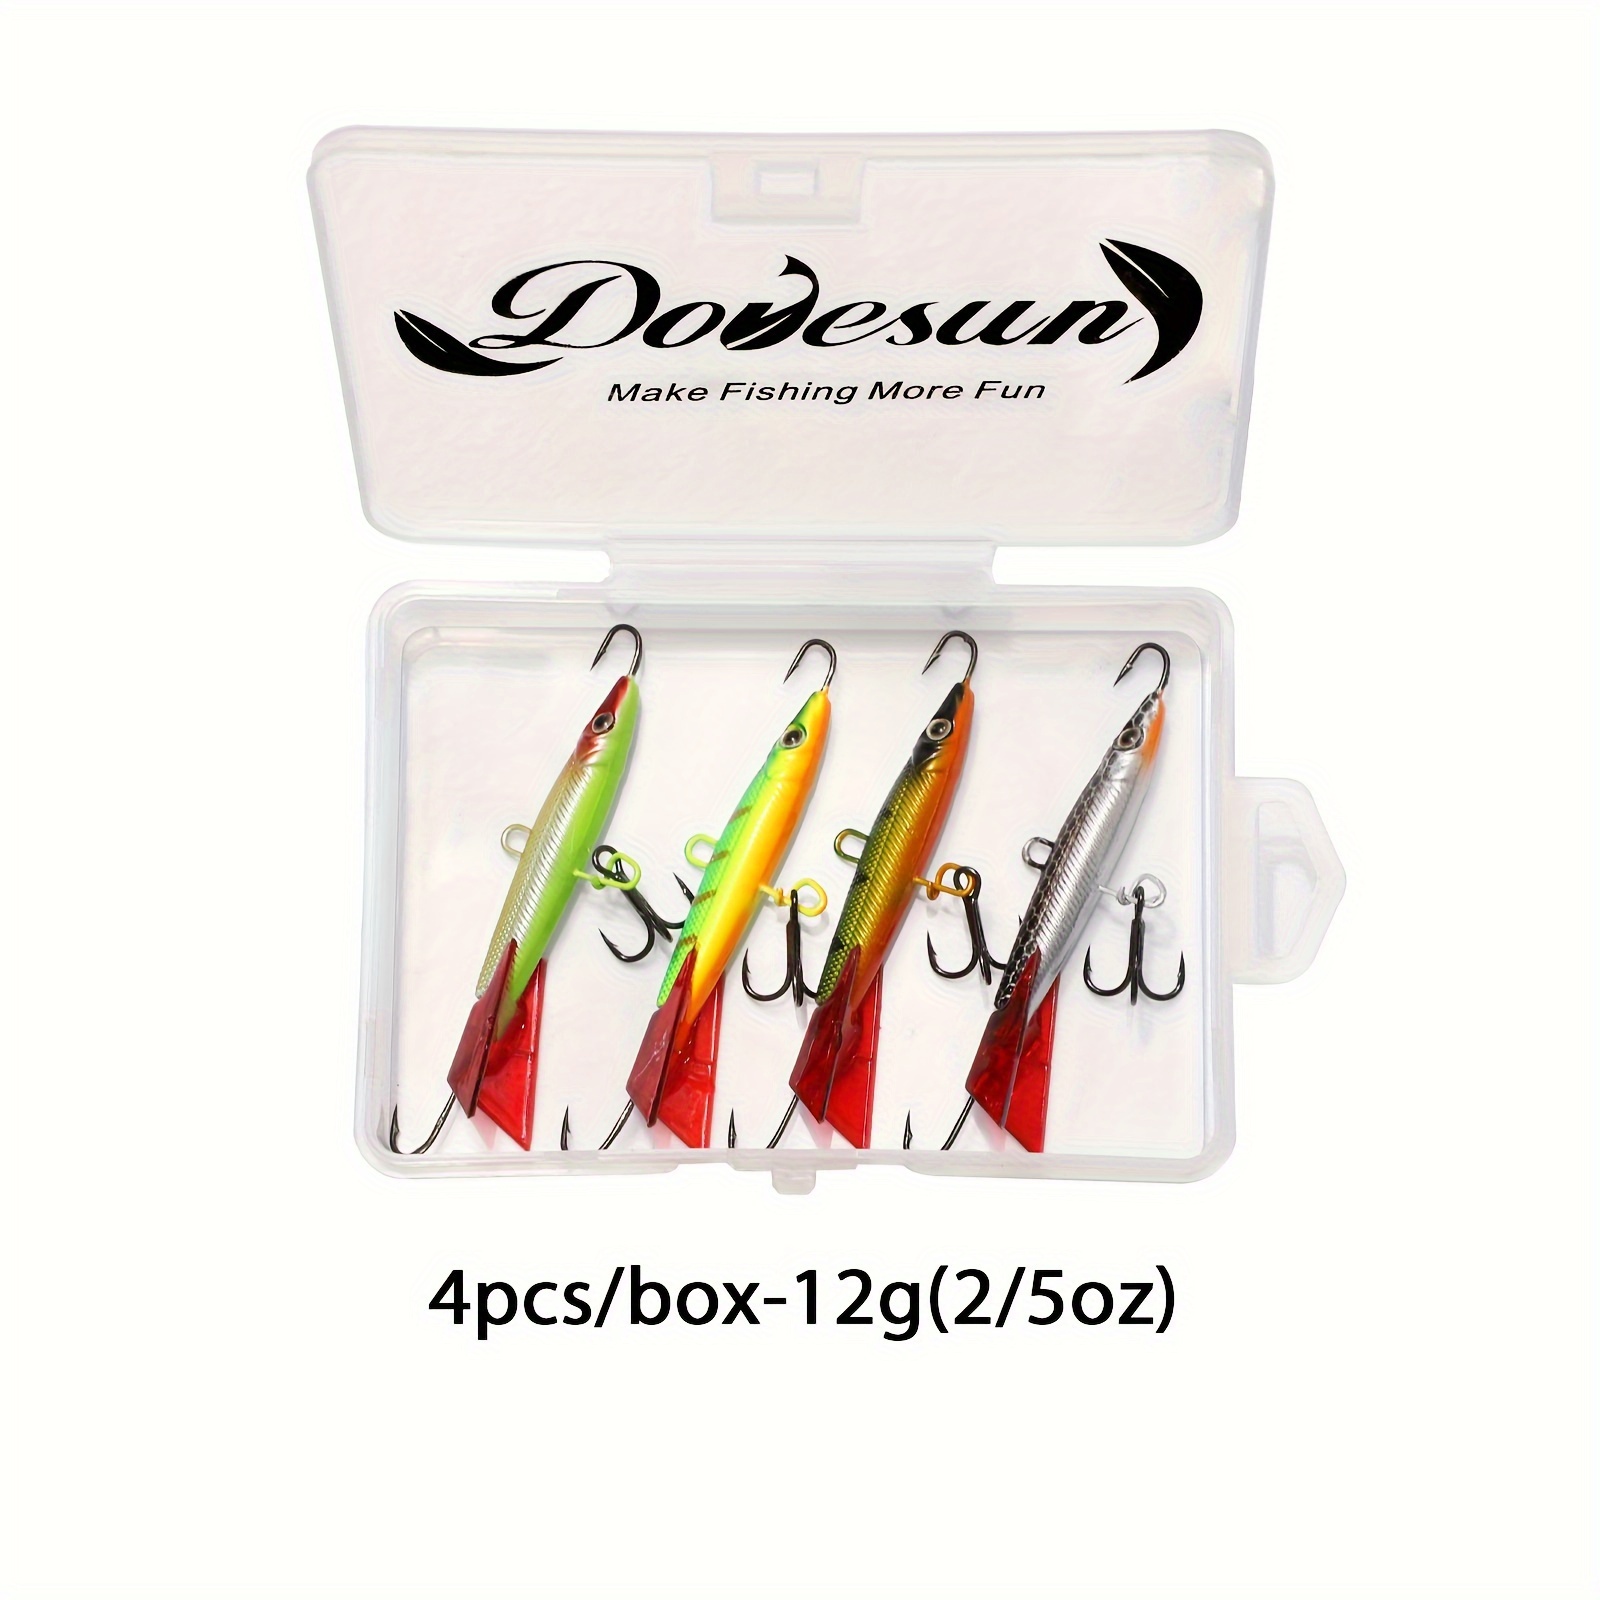 Reaction Tackle ICE FISHING Jigs- panfish/crappie/walleye/perch/trout/ bluegill 